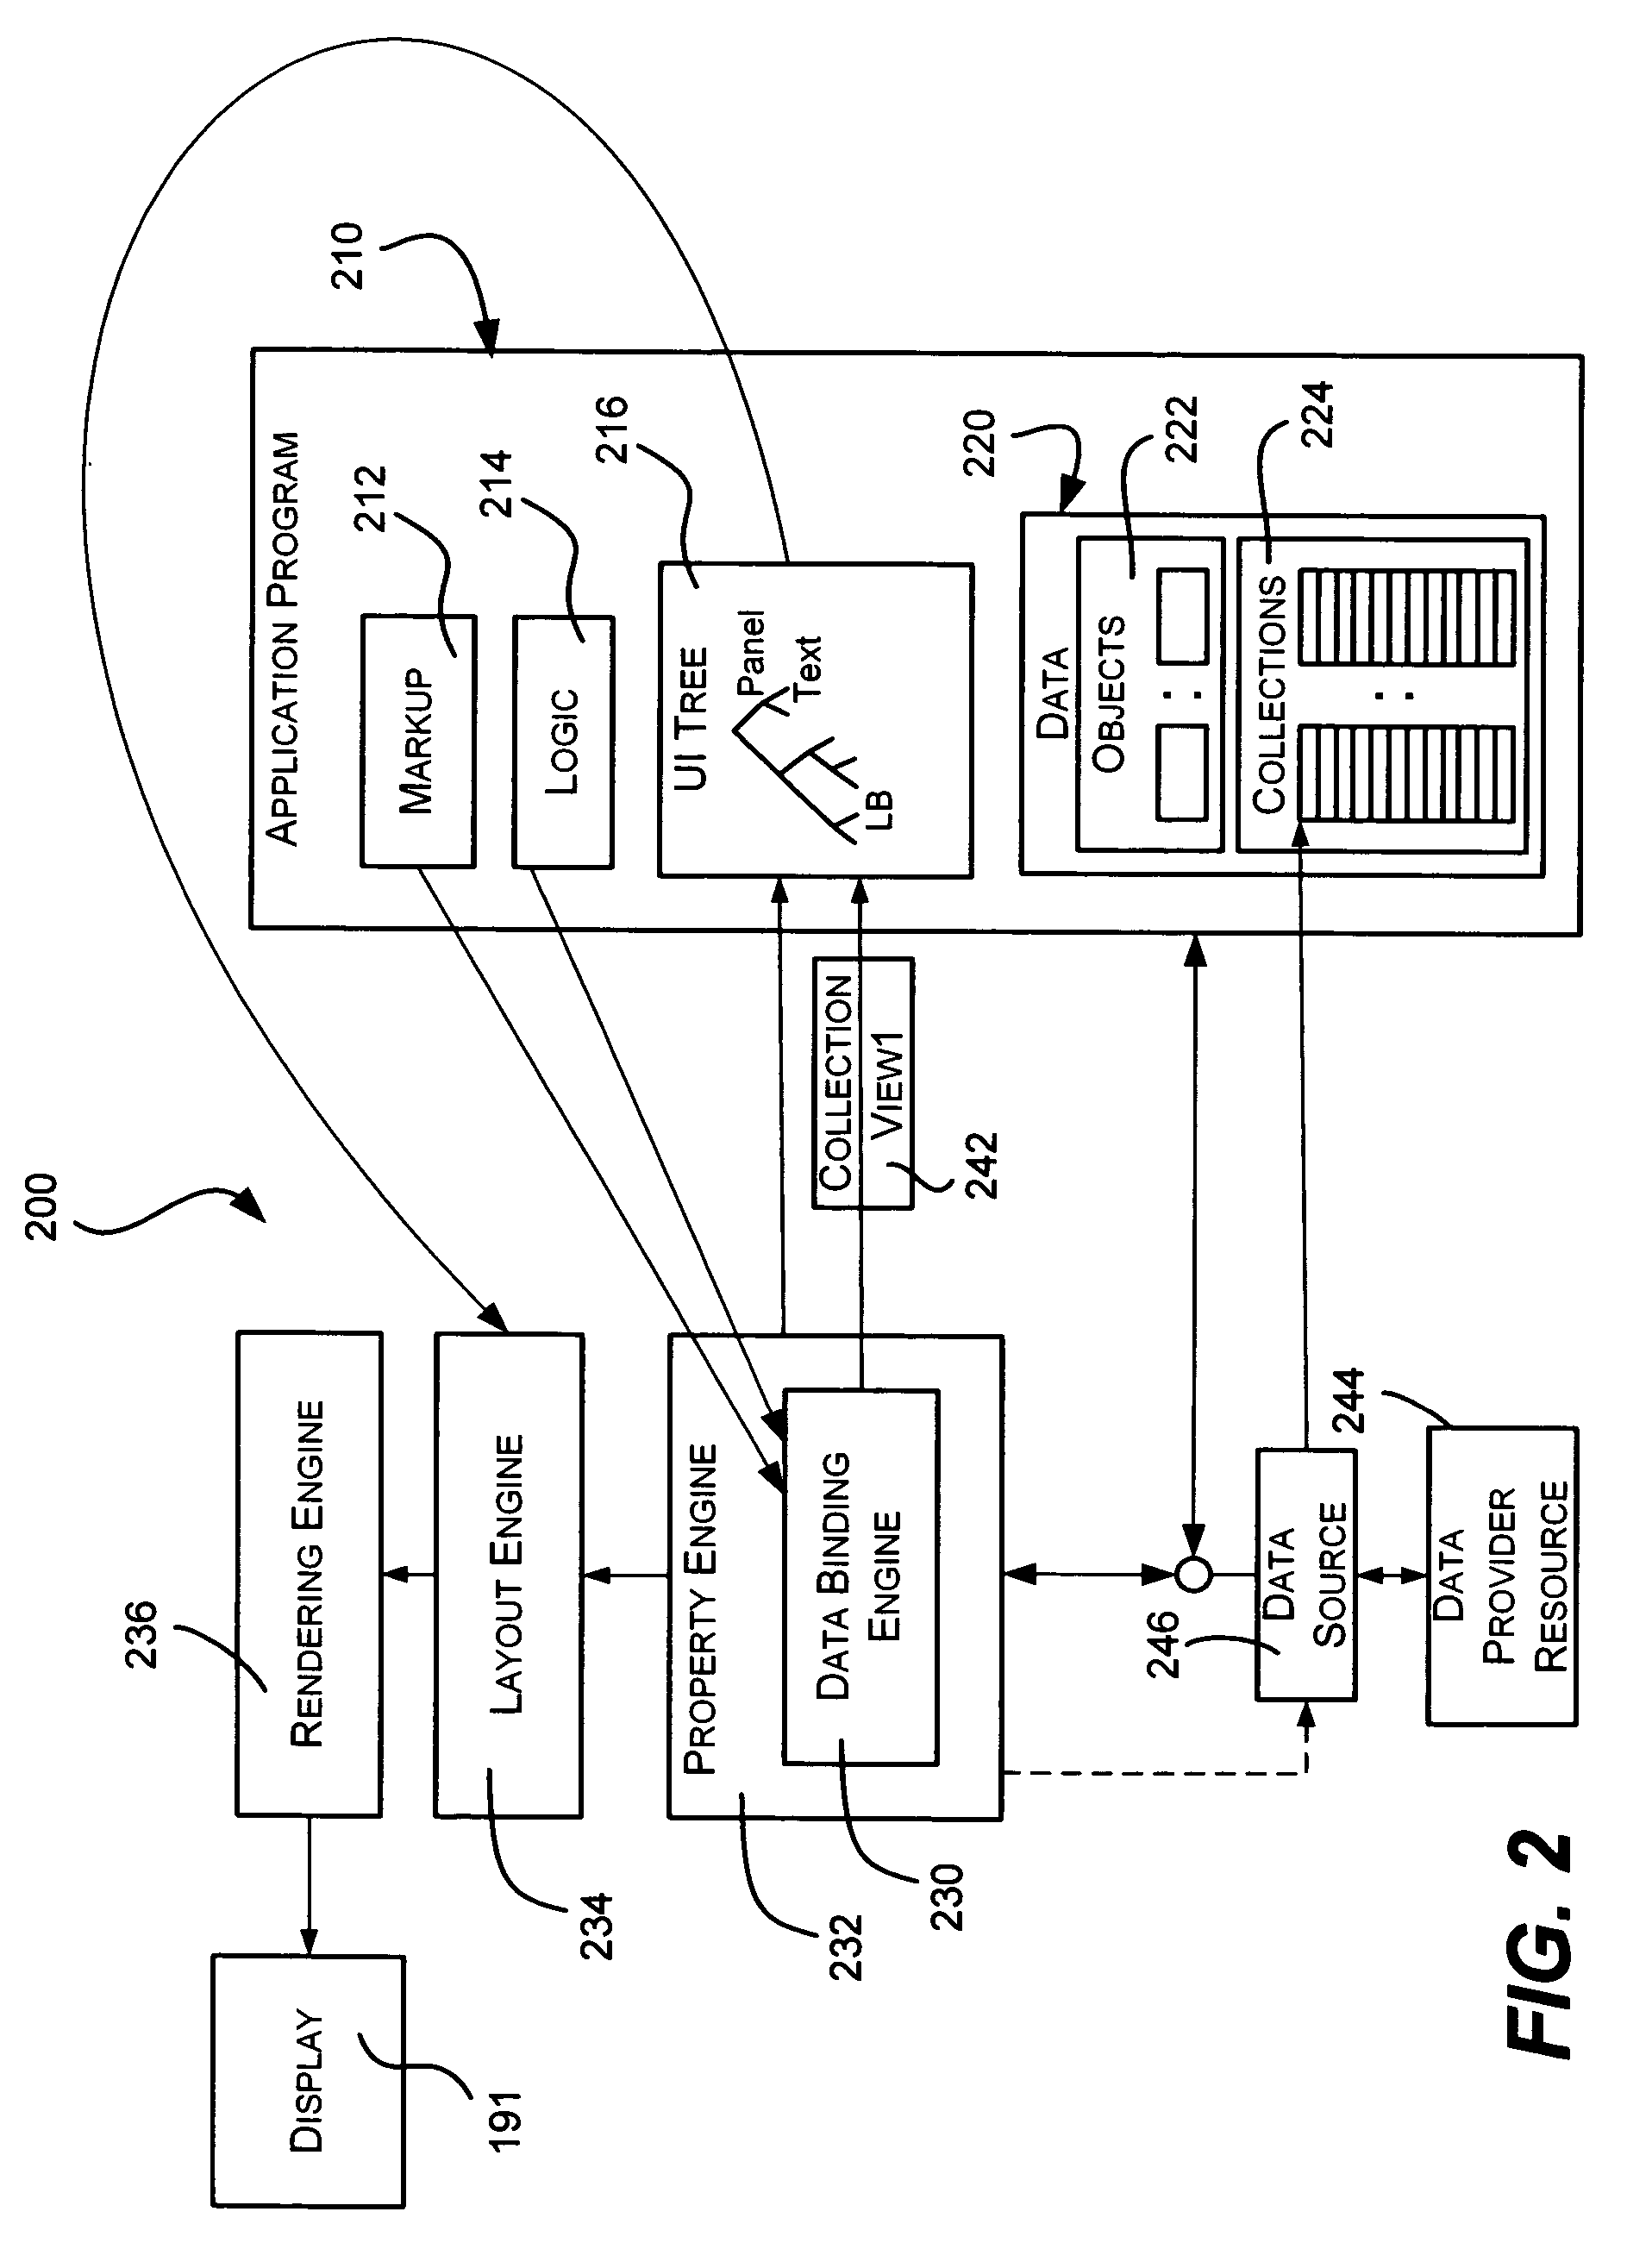 Data source objects for producing collections of data items